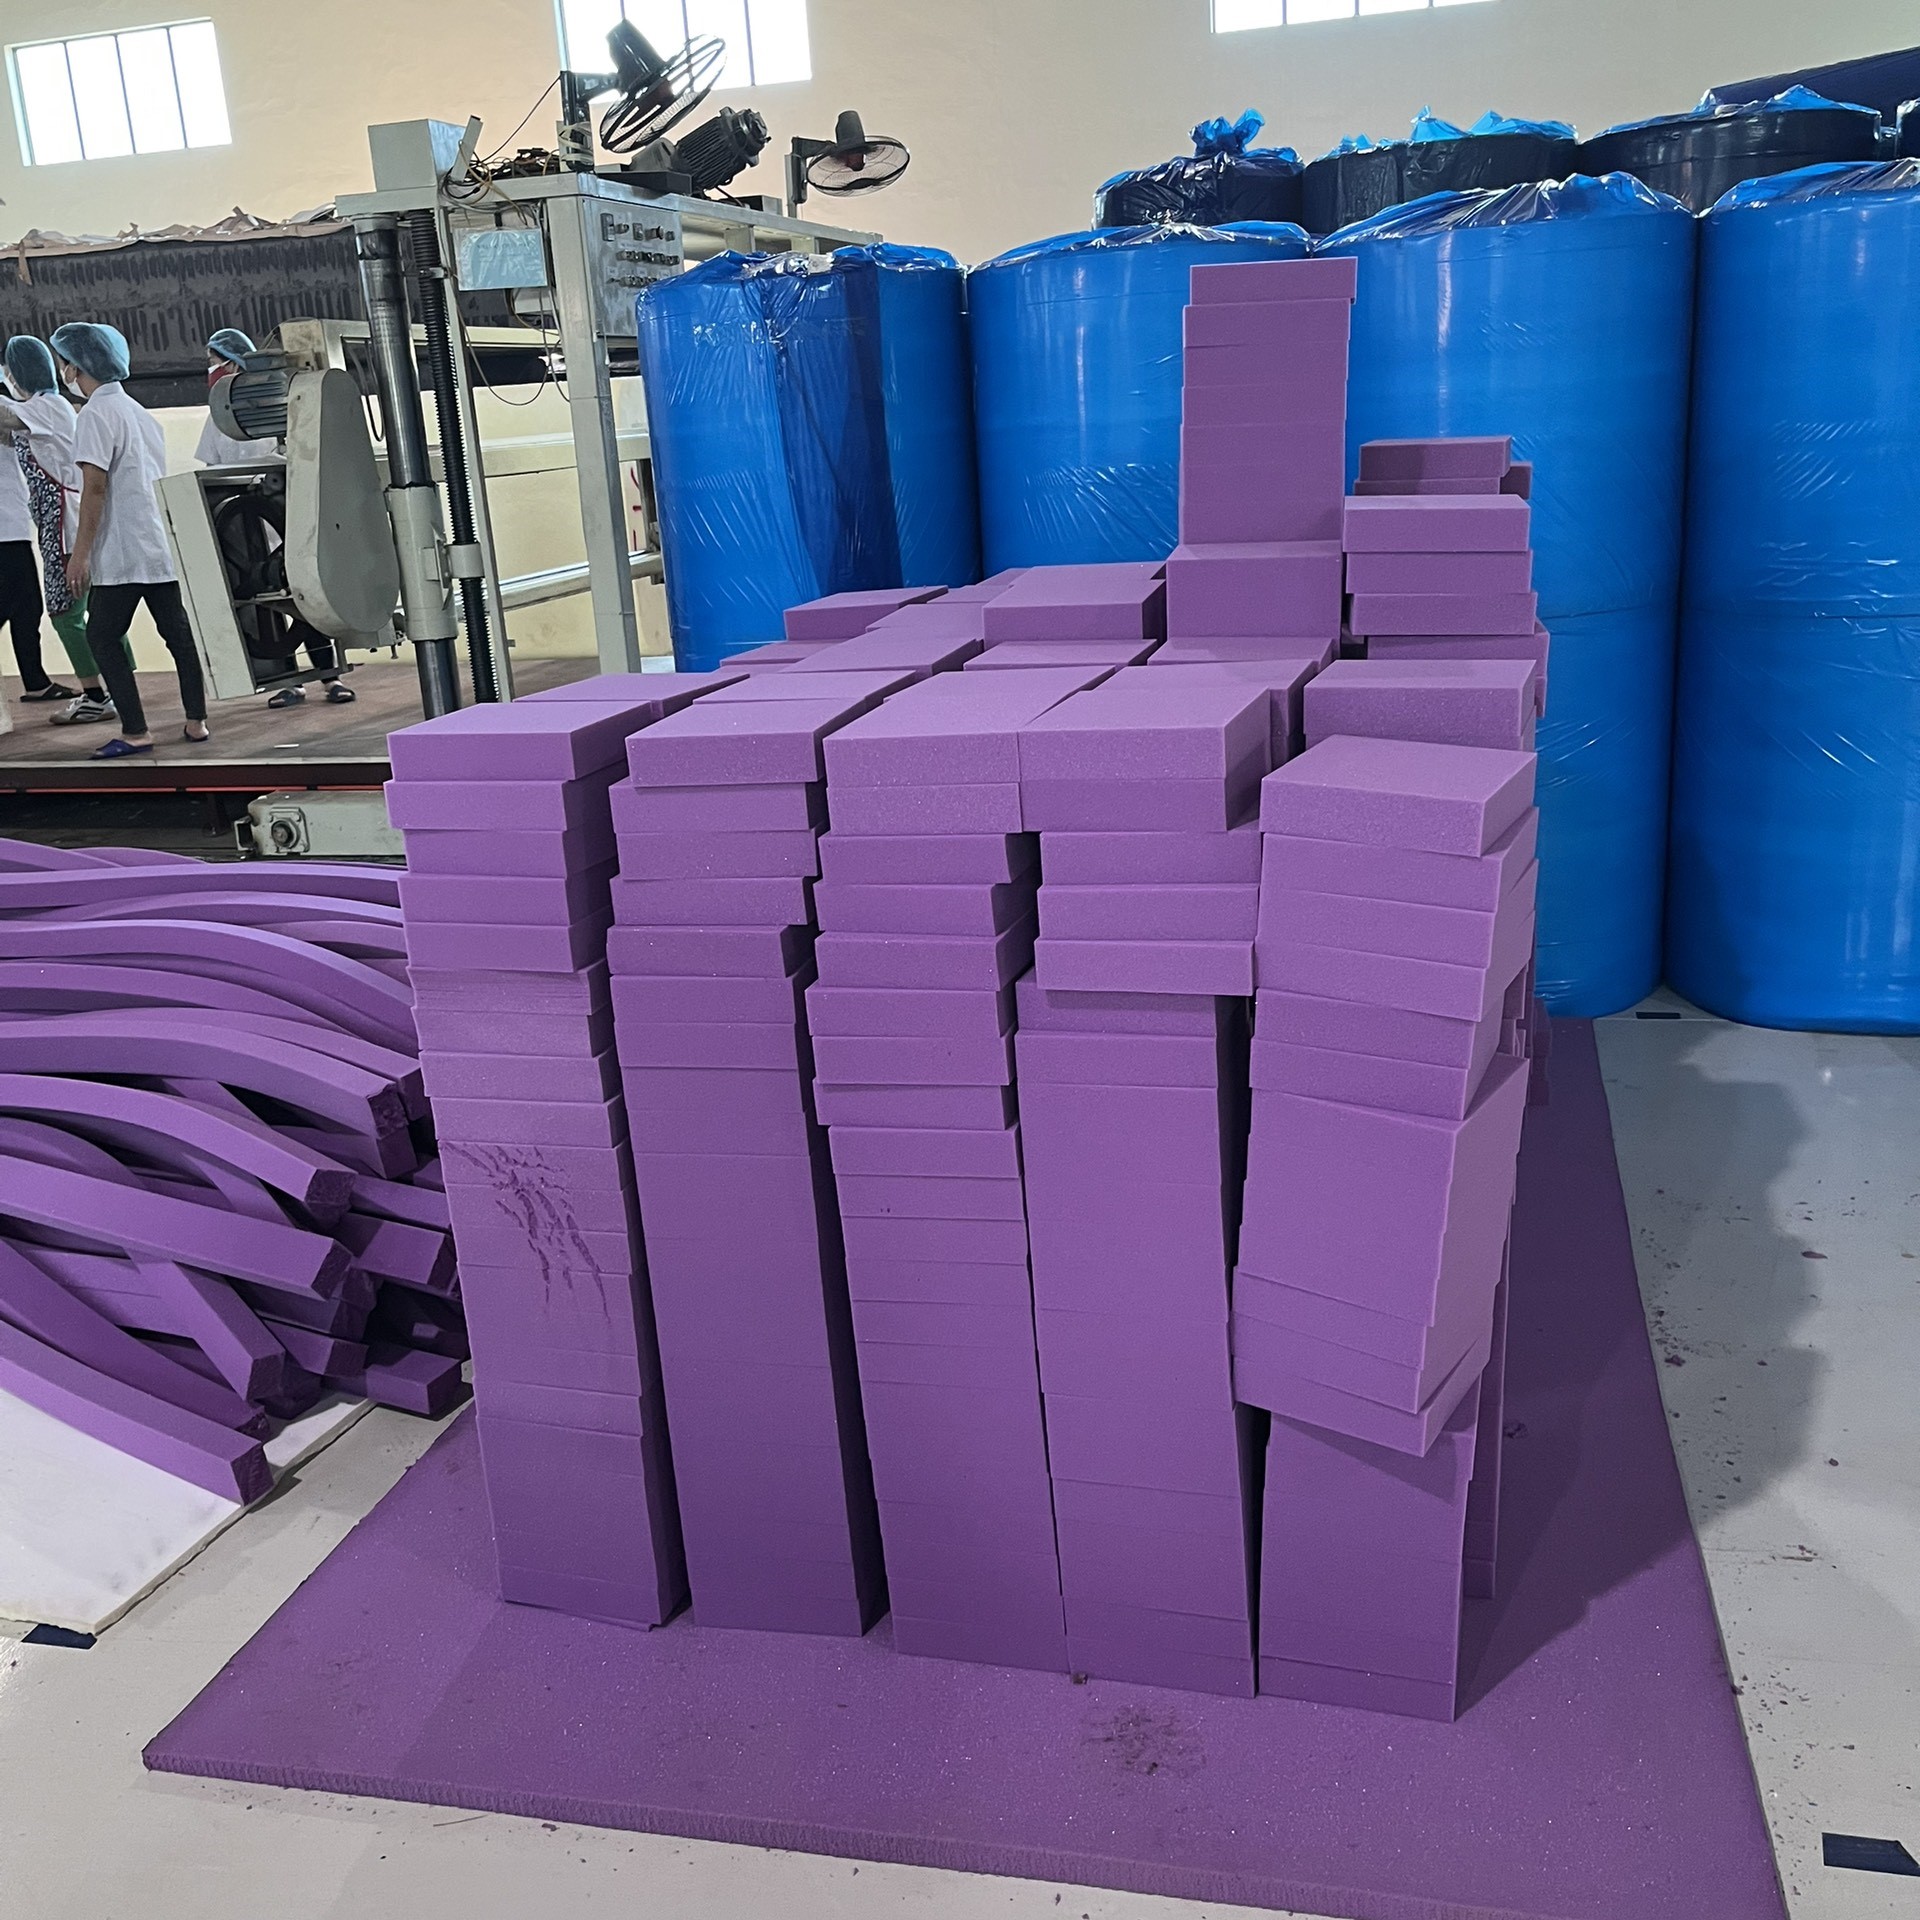 Polyurethane Foam Furniture Fast Delivery PU Foam Soft Products Material Resistant Shock Proof Shorten Production Time Vietnam 6